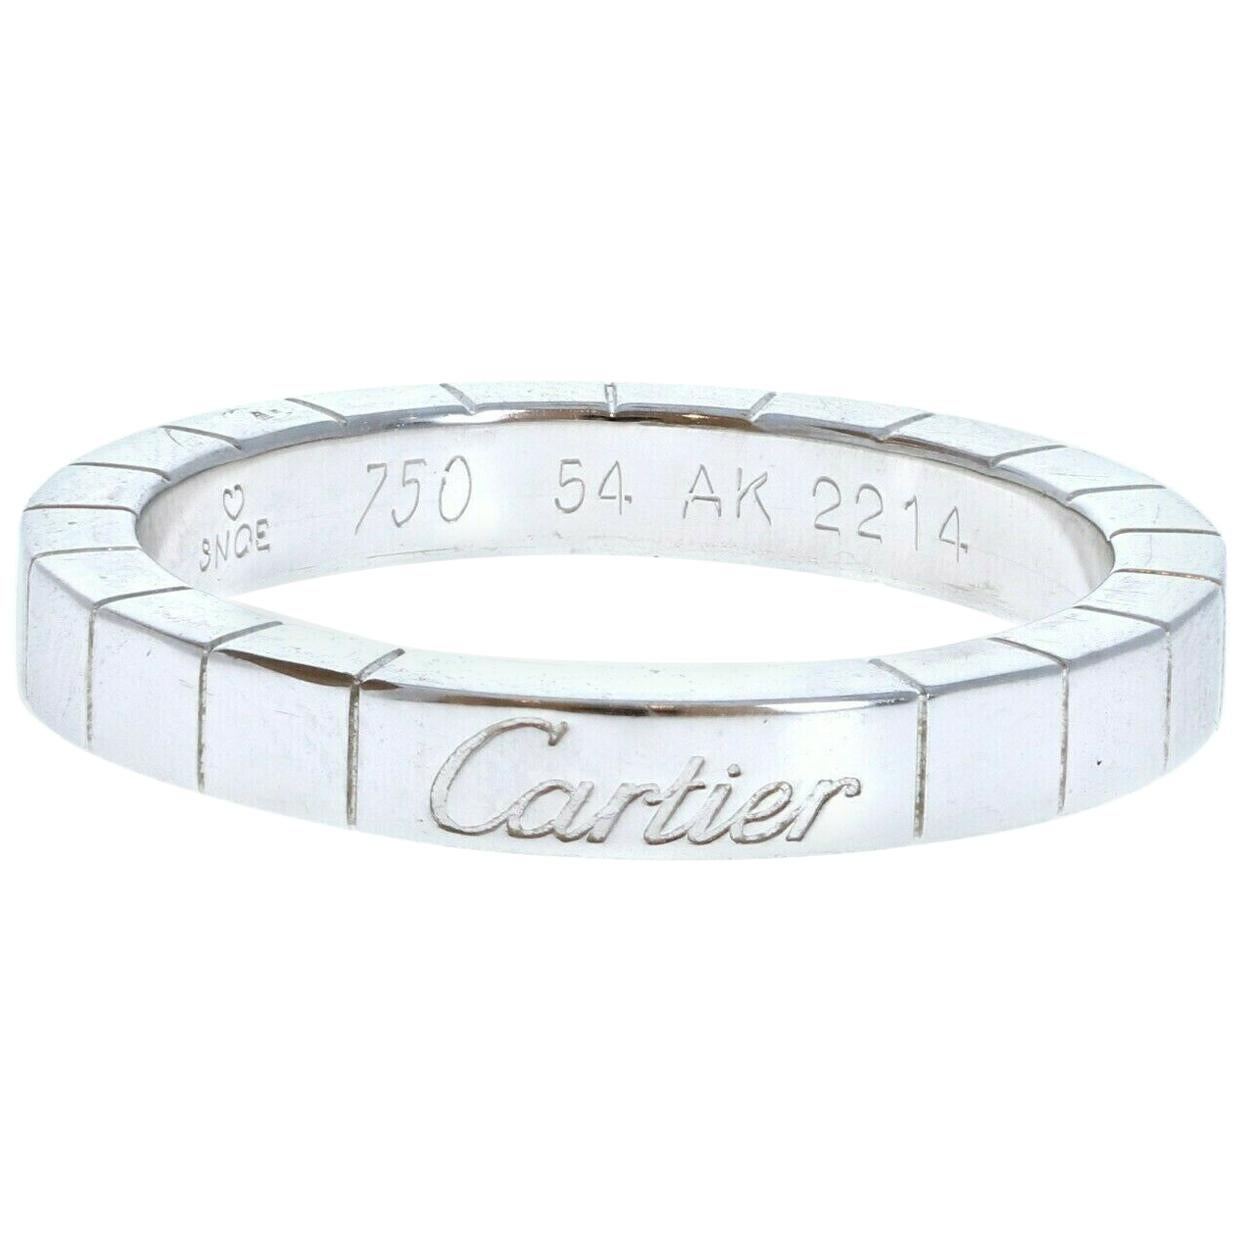 Cartier 18k White Gold Lanières Band 6.3g For Sale